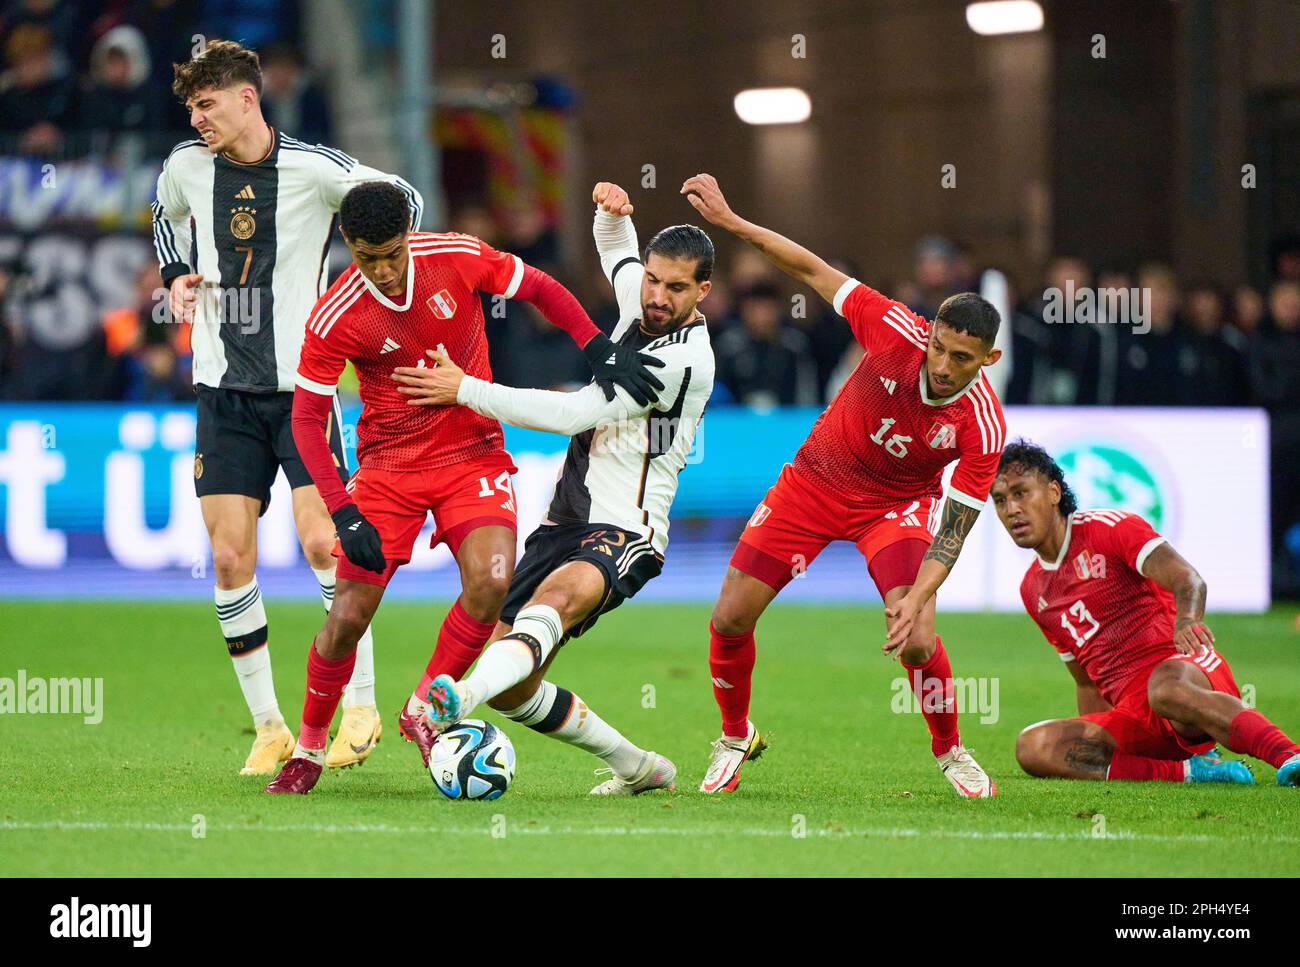 Emre Can, DFB 23  compete for the ball, tackling, duel, header, zweikampf, action, fight against Wilder Cartagena, Peru 14 Christopher Gonzales, Peru 16 Renato Tapia, Peru 13  in the friendly match GERMANY - PERU 2-0 Preparation for European Championships 2024 in Germany ,Season 2022/2023, on Mar 25, 2023  in Mainz, Germany.  © Peter Schatz / Alamy Live News Stock Photo